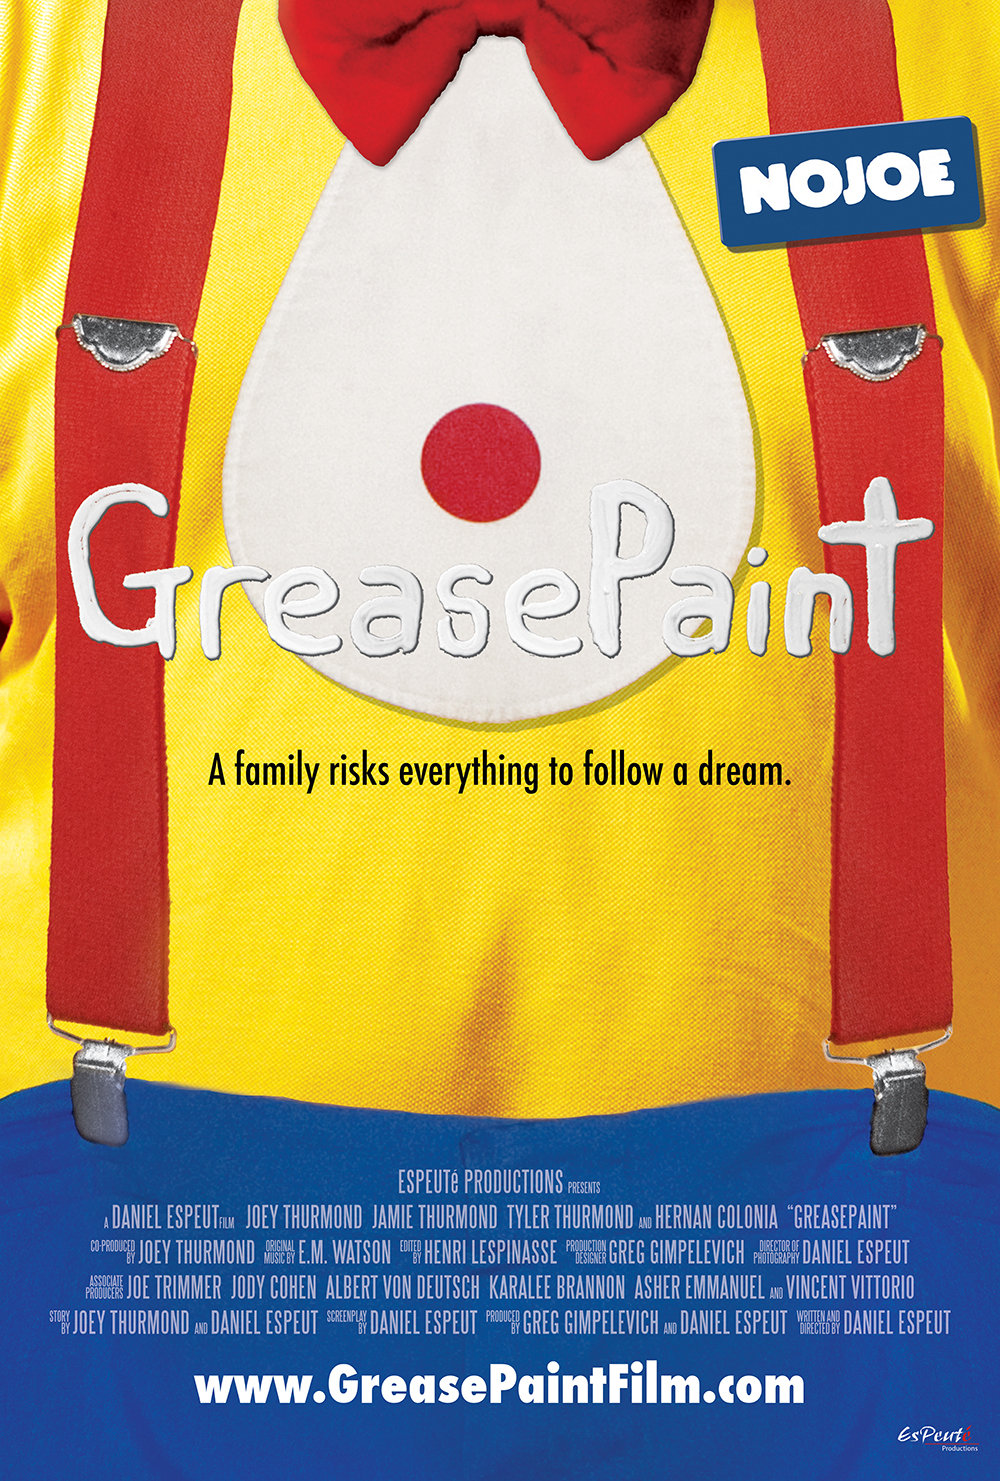 GreasePaint Film Poster (Nojoe) - A family risks everything to follow a dream.